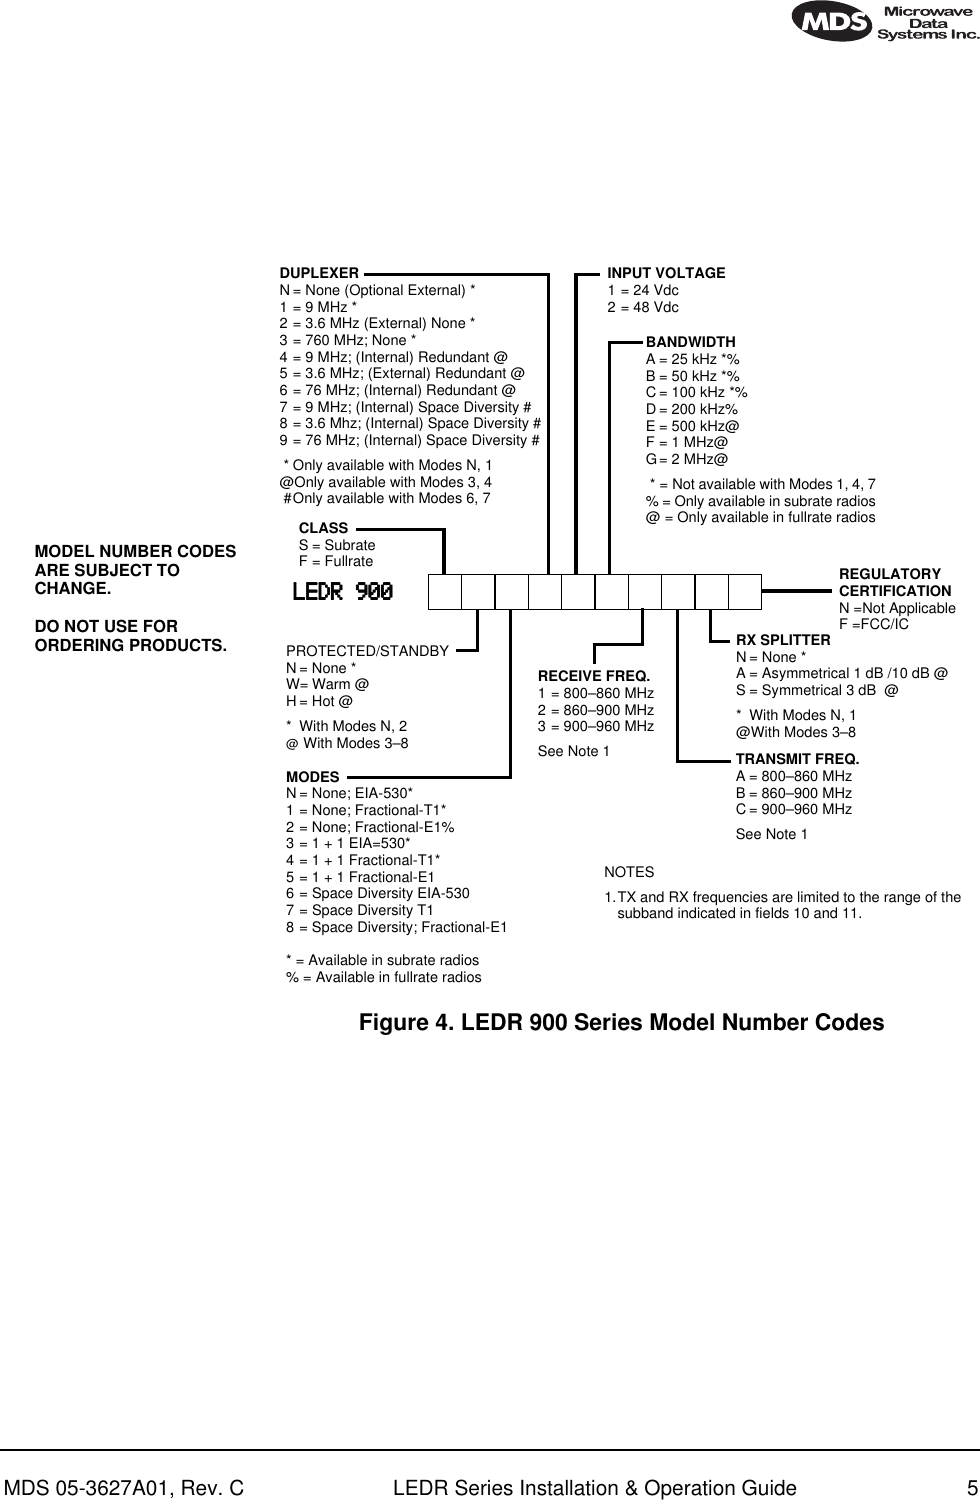  MDS 05-3627A01, Rev. C LEDR Series Installation &amp; Operation Guide 5 Invisible place holder Figure 4. LEDR 900 Series Model Number CodesMODEL NUMBER CODES ARE SUBJECT TO CHANGE.DO NOT USE FOR ORDERING PRODUCTS.MODESN = None; EIA-530*1 = None; Fractional-T1*2 = None; Fractional-E1%3 = 1 + 1 EIA=530*4 = 1 + 1 Fractional-T1*5 = 1 + 1 Fractional-E16 = Space Diversity EIA-5307 = Space Diversity T18 = Space Diversity; Fractional-E1* = Available in subrate radios% = Available in fullrate radiosPROTECTED/STANDBYN = None *W= Warm @H = Hot @*  With Modes N, 2@ With Modes 3–8LLLLEEEEDDDDRRRR    999900000000DUPLEXERN = None (Optional External) *1 = 9 MHz *2 = 3.6 MHz (External) None *3 = 760 MHz; None *4 = 9 MHz; (Internal) Redundant @5 = 3.6 MHz; (External) Redundant @6 = 76 MHz; (Internal) Redundant @7 = 9 MHz; (Internal) Space Diversity #8 = 3.6 Mhz; (Internal) Space Diversity #9 = 76 MHz; (Internal) Space Diversity # * Only available with Modes N, 1@Only available with Modes 3, 4 #Only available with Modes 6, 7BANDWIDTHA = 25 kHz *%B = 50 kHz *%C = 100 kHz *%D = 200 kHz%E = 500 kHz@F = 1 MHz@G= 2 MHz@ * = Not available with Modes 1, 4, 7% = Only available in subrate radios@ = Only available in fullrate radiosNOTES1.TX and RX frequencies are limited to the range of the subband indicated in fields 10 and 11.TRANSMIT FREQ.A = 800–860 MHzB = 860–900 MHzC = 900–960 MHzSee Note 1REGULATORY CERTIFICATIONN =Not ApplicableF =FCC/ICRX SPLITTERN = None *A = Asymmetrical 1 dB /10 dB @S = Symmetrical 3 dB  @* With Modes N, 1@With Modes 3–8INPUT VOLTAGE1 = 24 Vdc2 = 48 VdcRECEIVE FREQ.1 = 800–860 MHz2 = 860–900 MHz3 = 900–960 MHzSee Note 1CLASSS = SubrateF = Fullrate